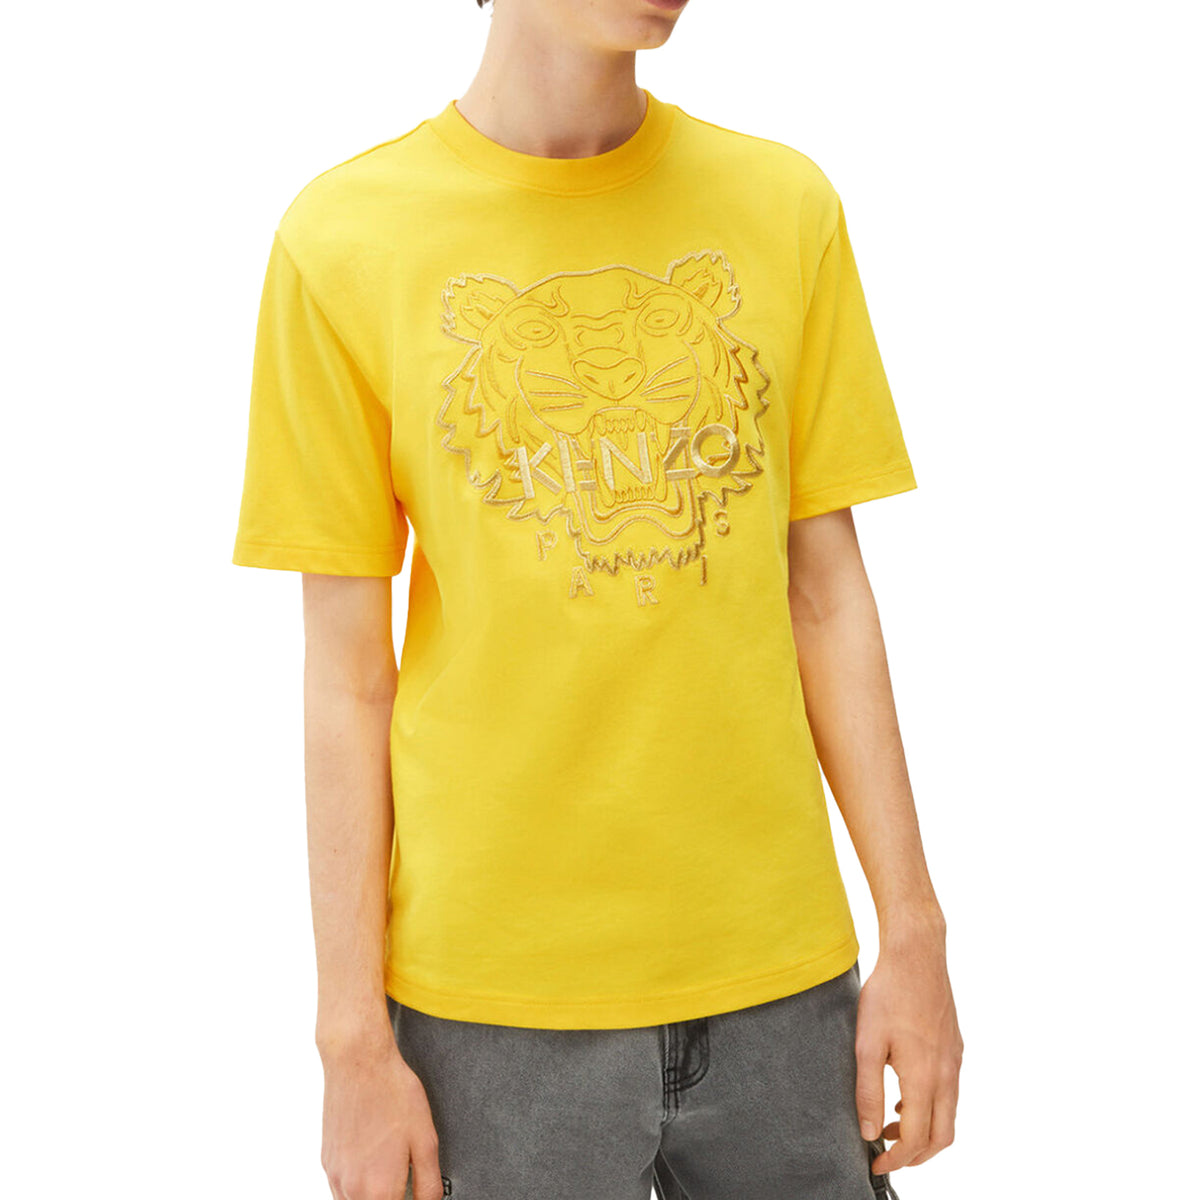 Kenzo Men's 'Year of The Tiger' Classic T-Shirt